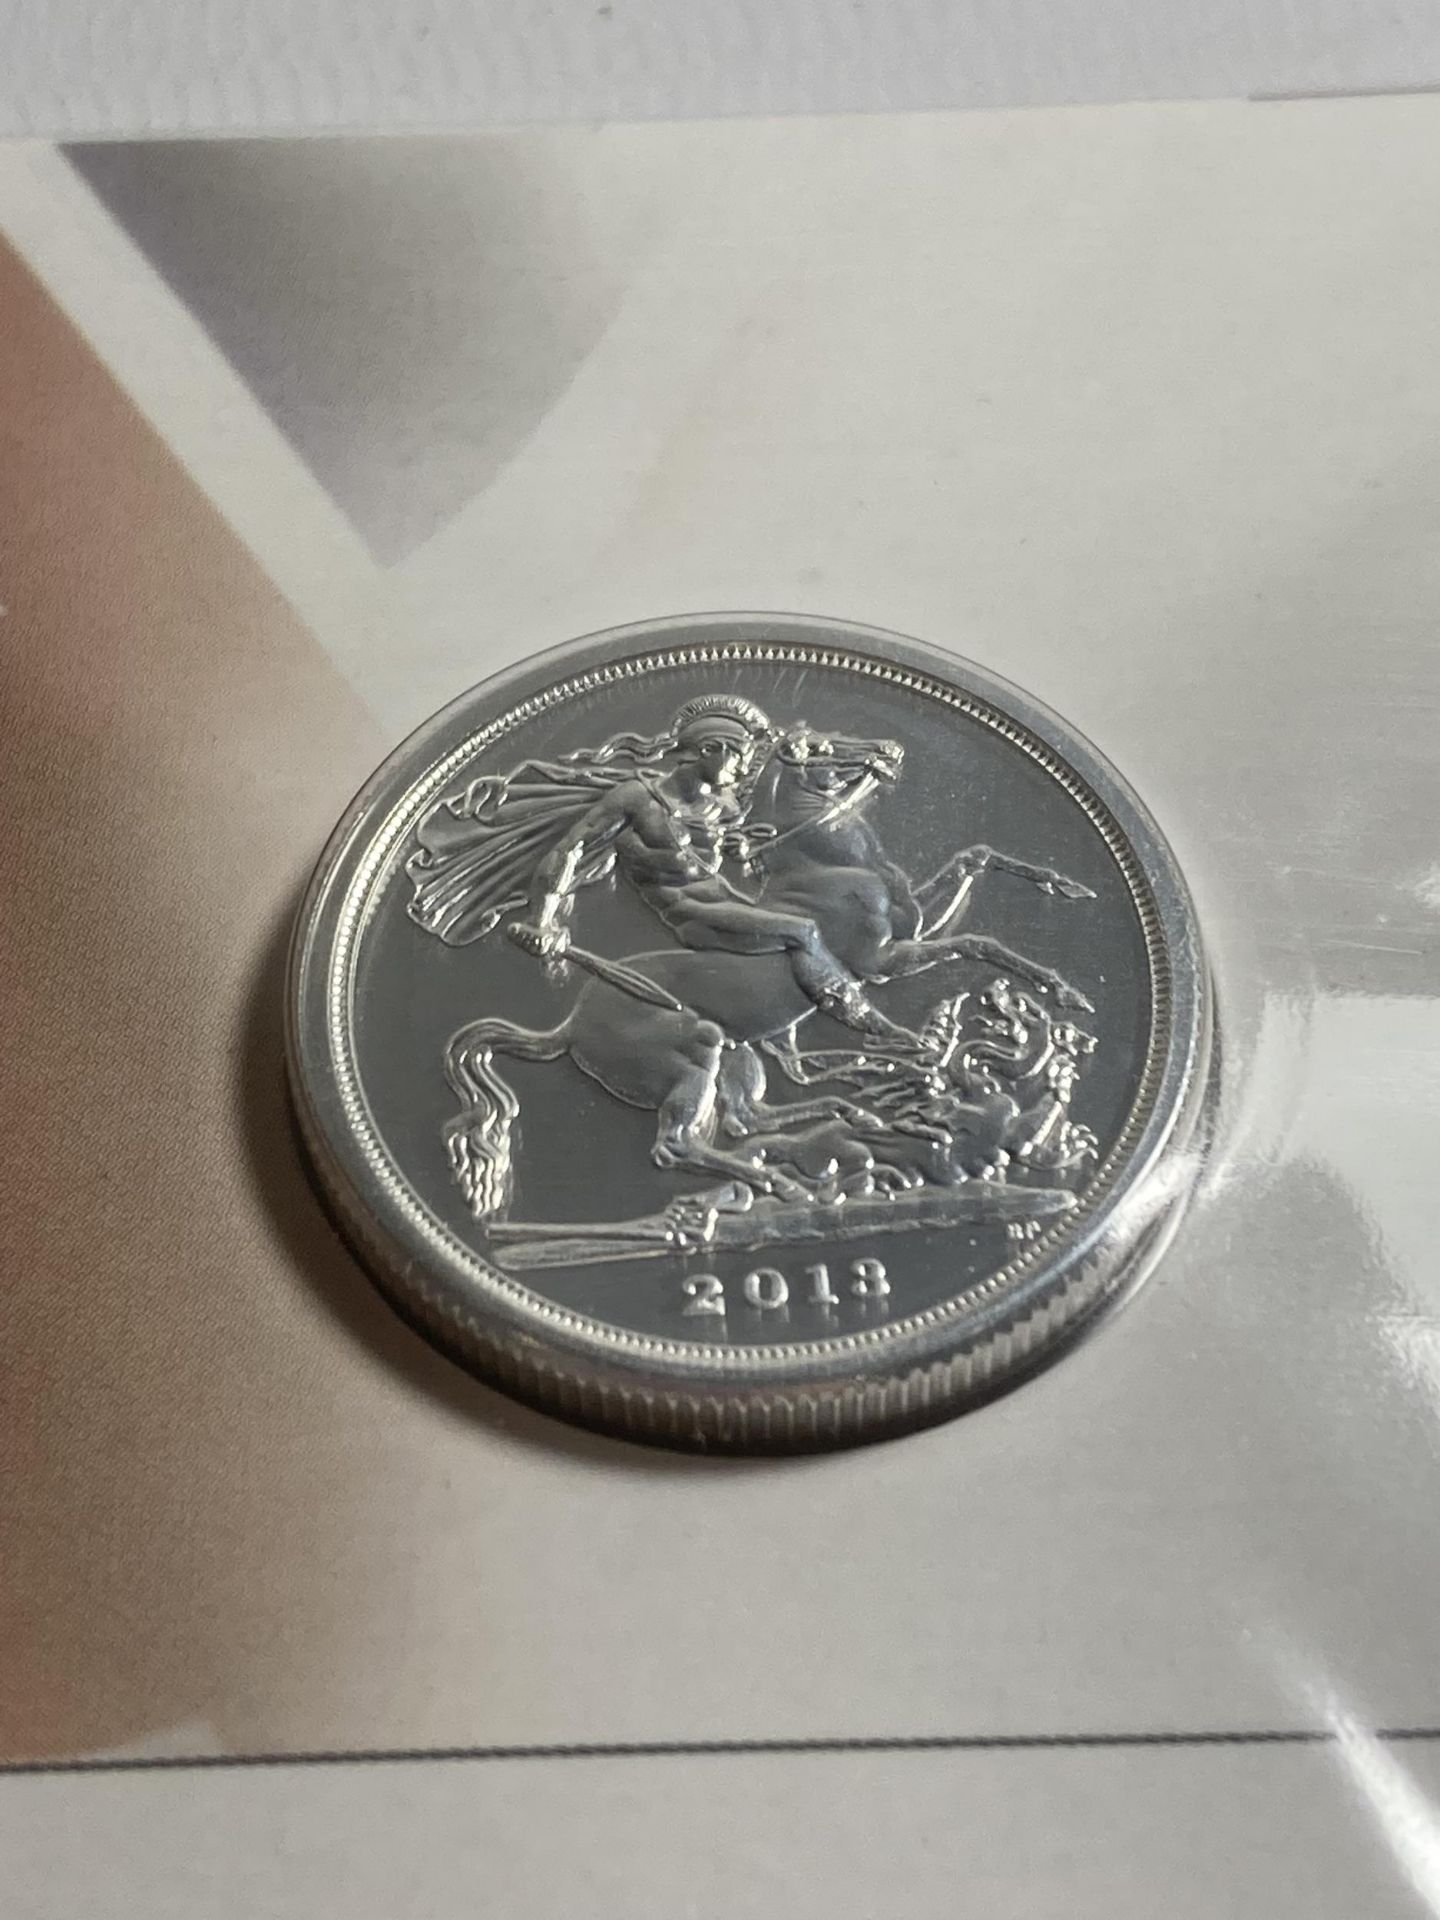 A ROYAL MINT GEORGE AND THE DRAGON 2013 UK £20 FINE SILVER COIN - Bild 2 aus 3